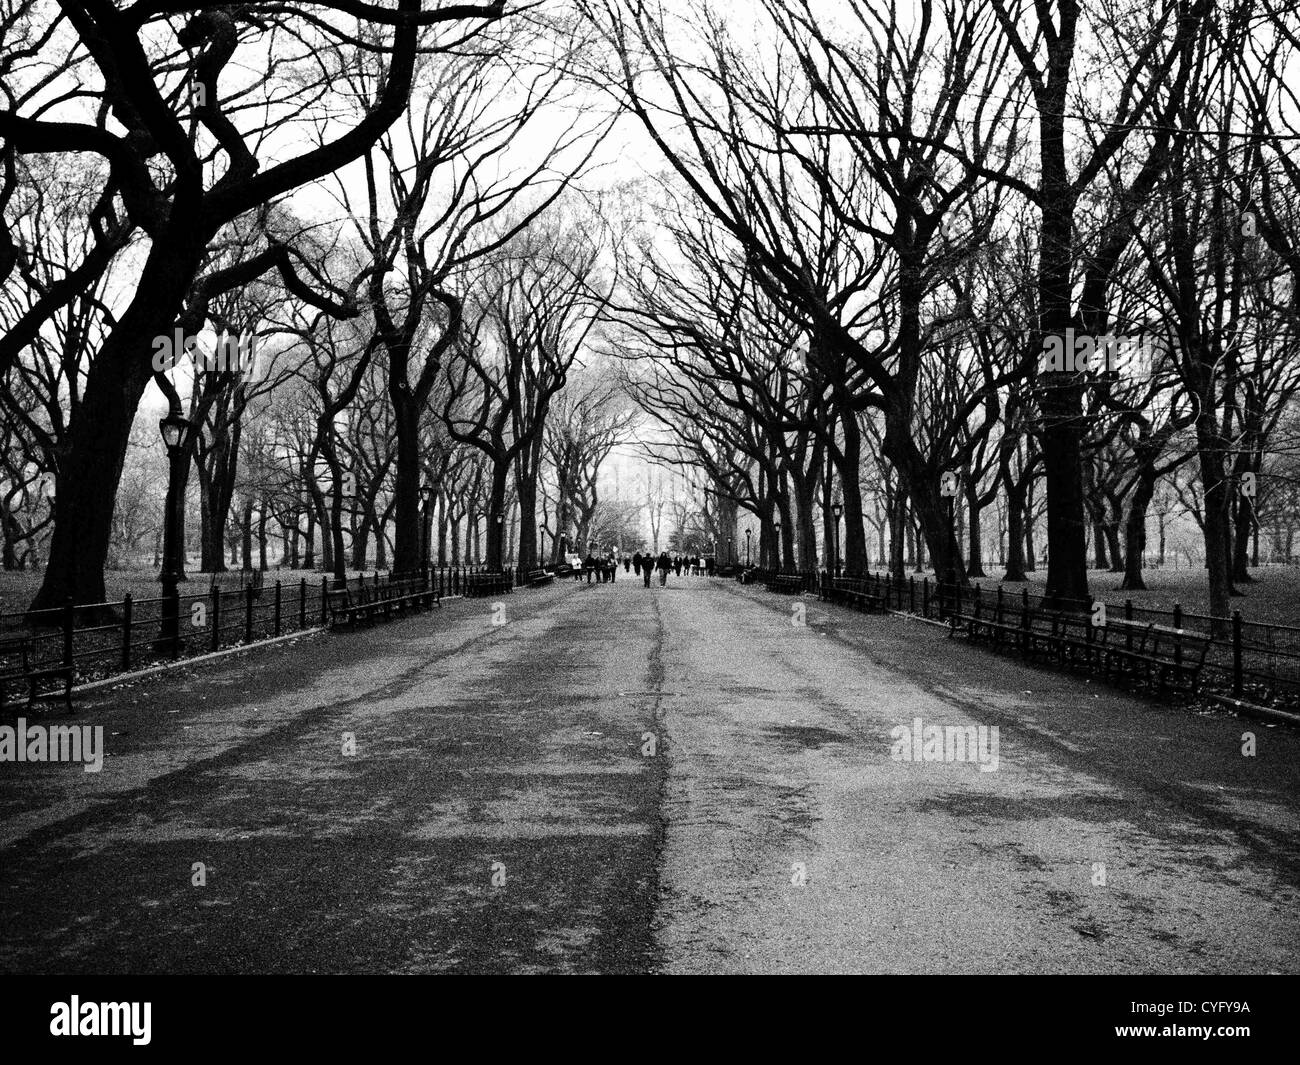 Central park Black and White Stock Photos & Images - Alamy